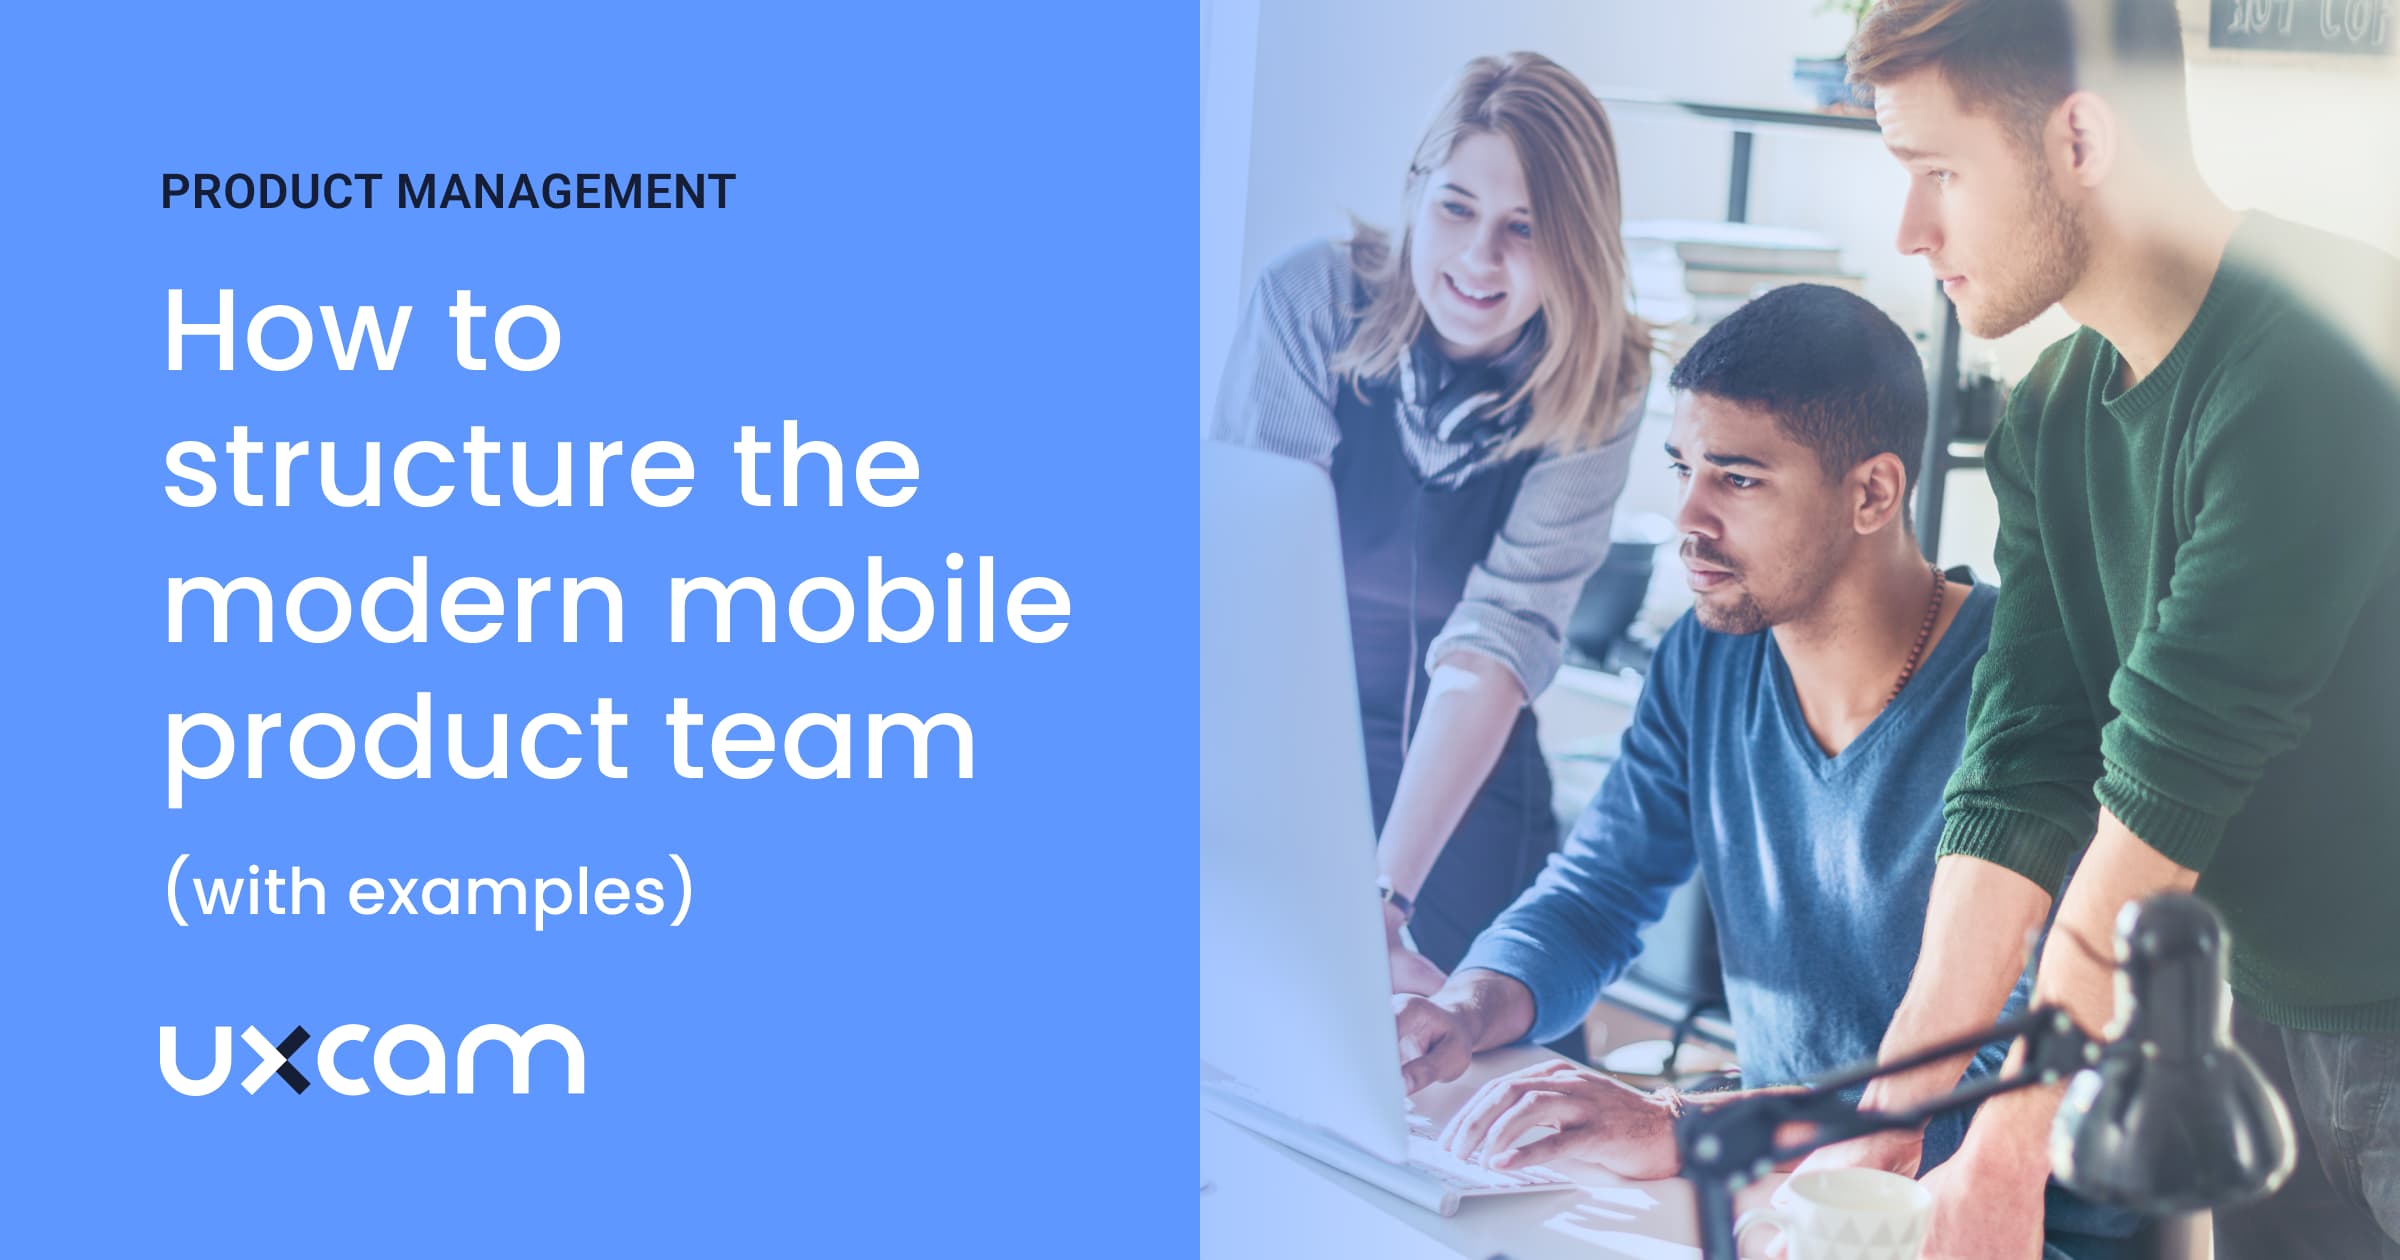 How to structure the modern mobile product team